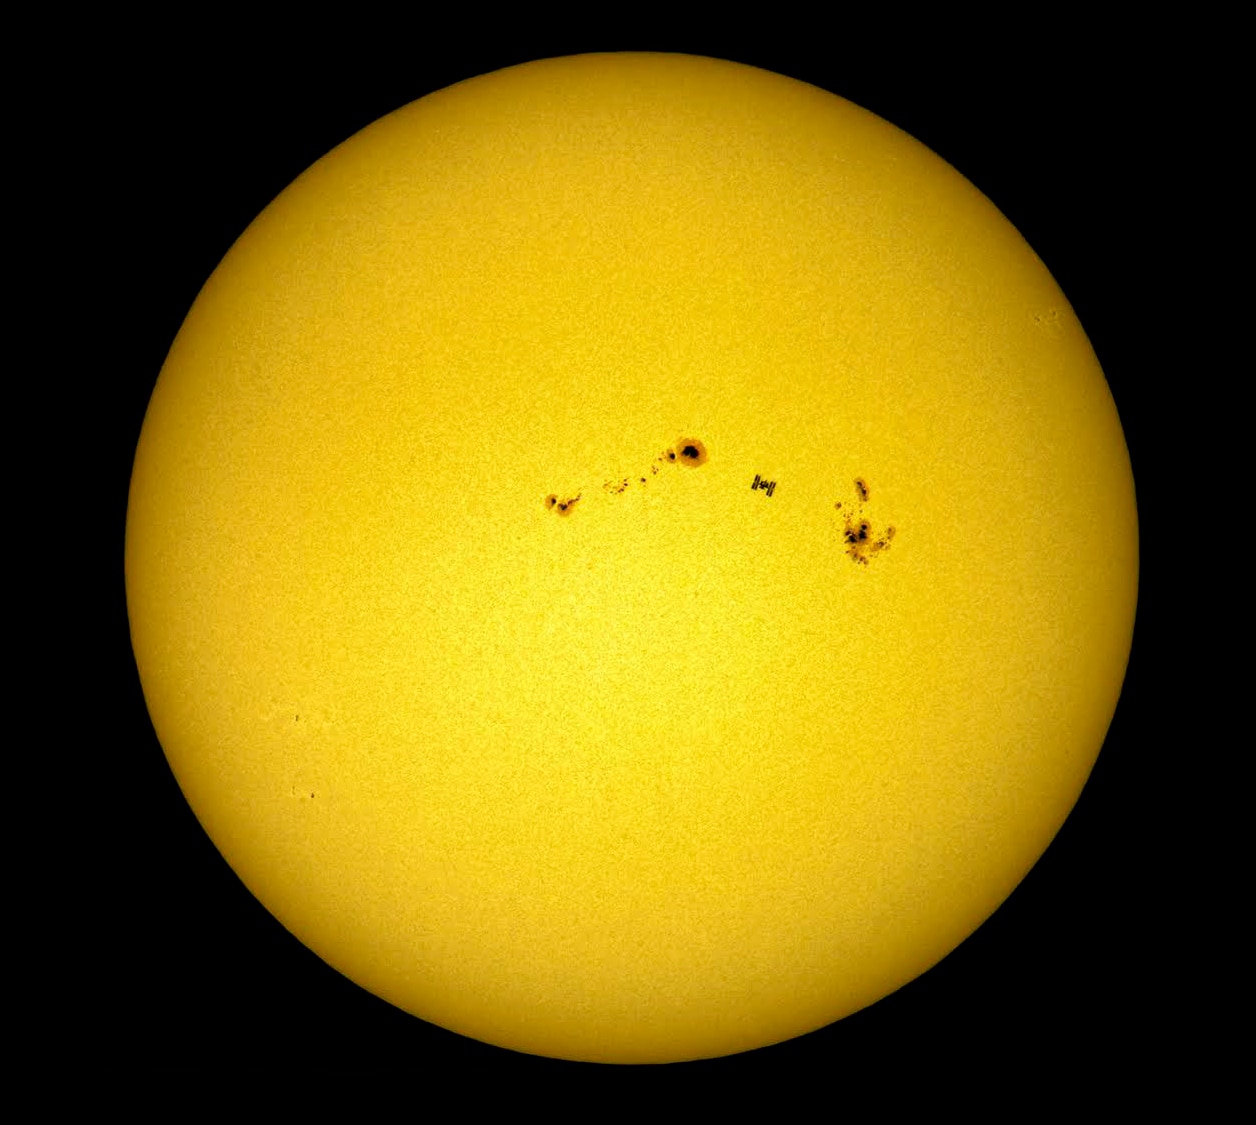 ISS transiting the Sun between two huge sunspot groups. Credit: Dani Caxete